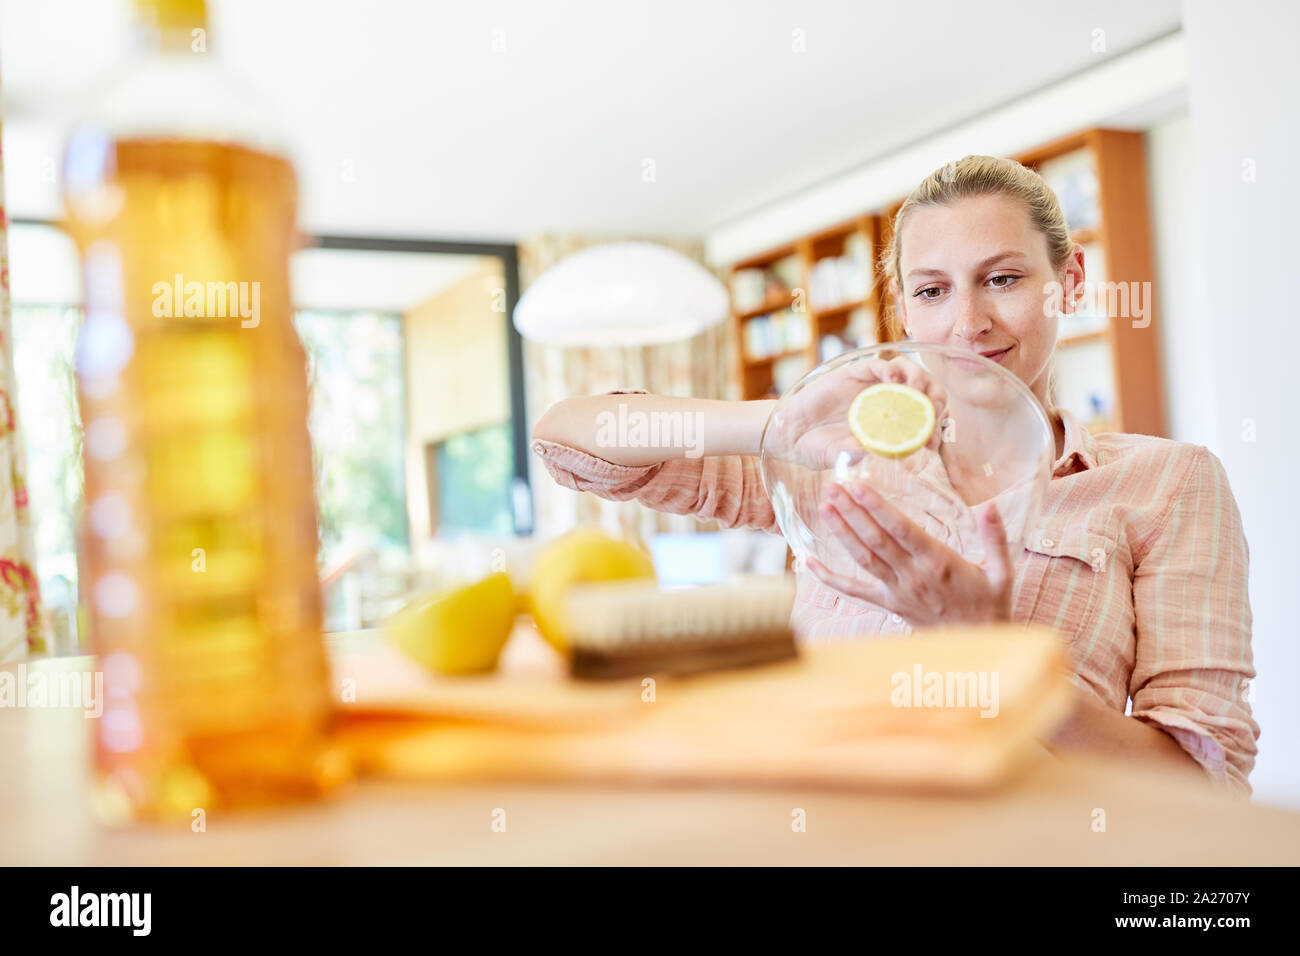 Housewife uses lemons as a home remedy for cleaning a glass bowl Stock Photo